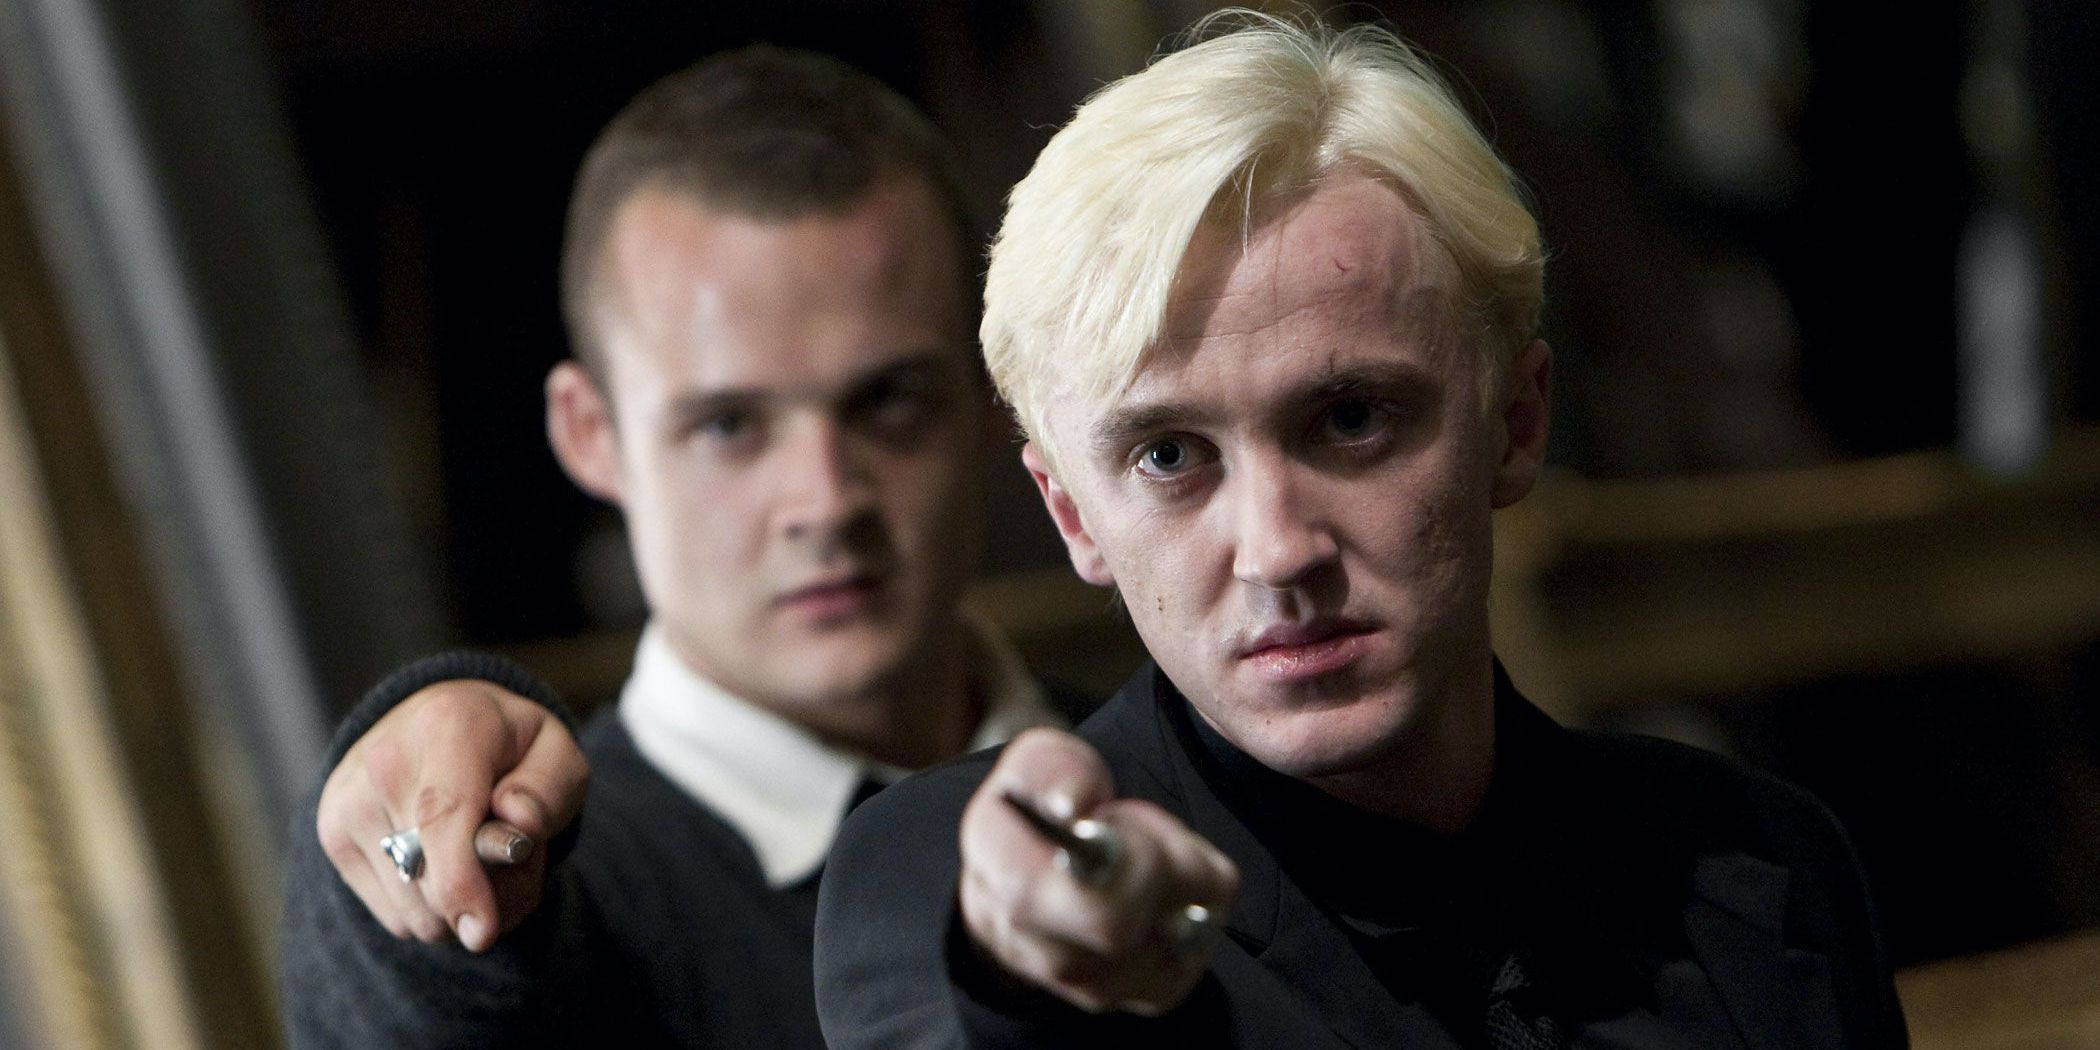 Malfoy points his wand with Goyle doing the same behind him